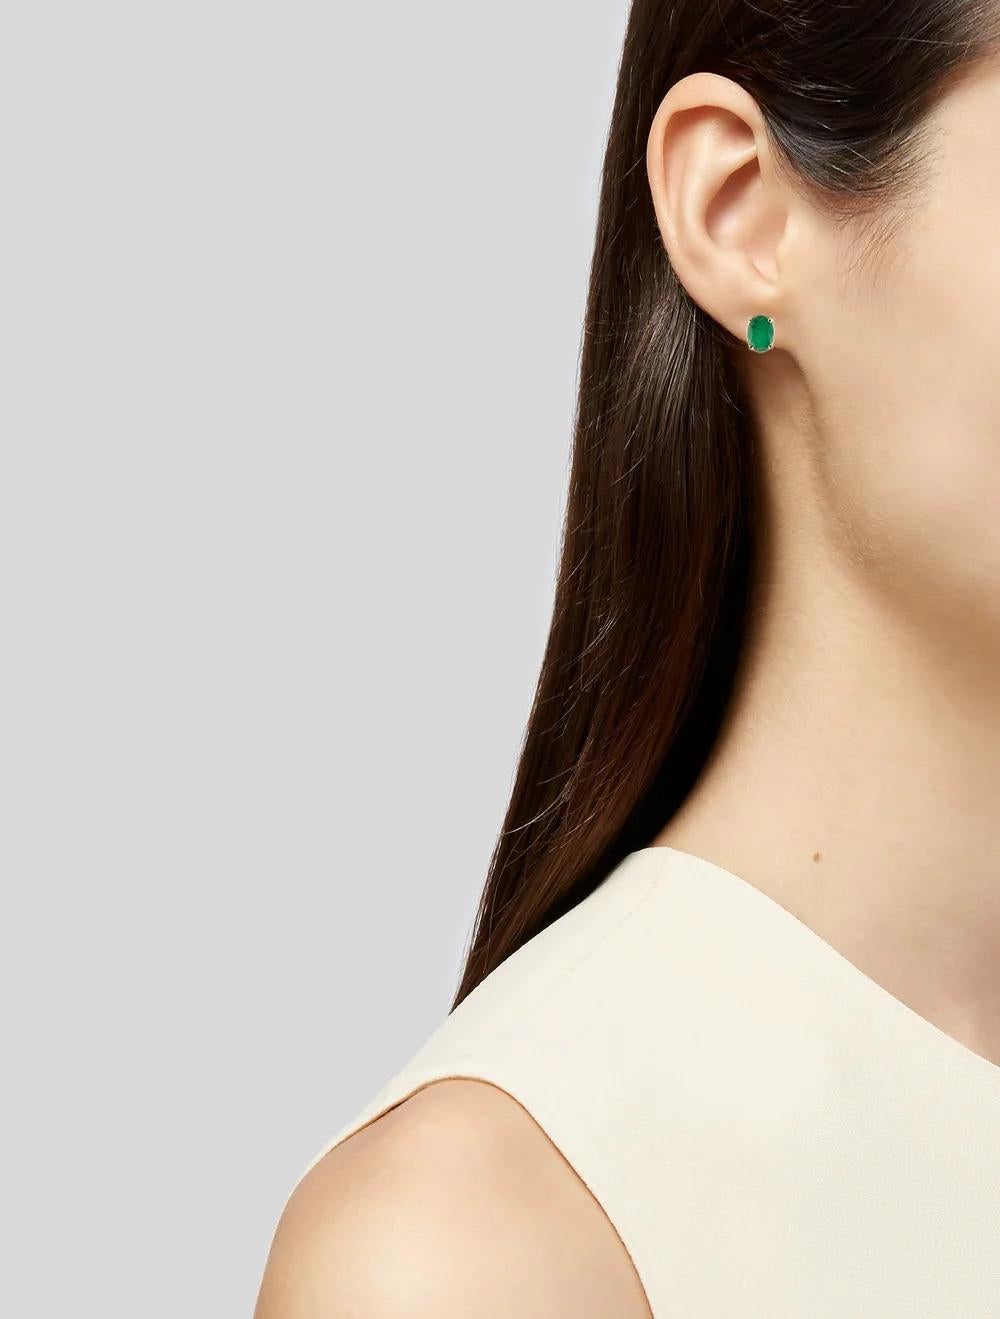 Elevate your elegance with these captivating 14K Yellow Gold Emerald Stud Earrings, boasting a total carat weight of 1.71. Crafted to perfection, each earring features a stunning Oval Brilliant Emerald, radiating a mesmerizing green hue. The